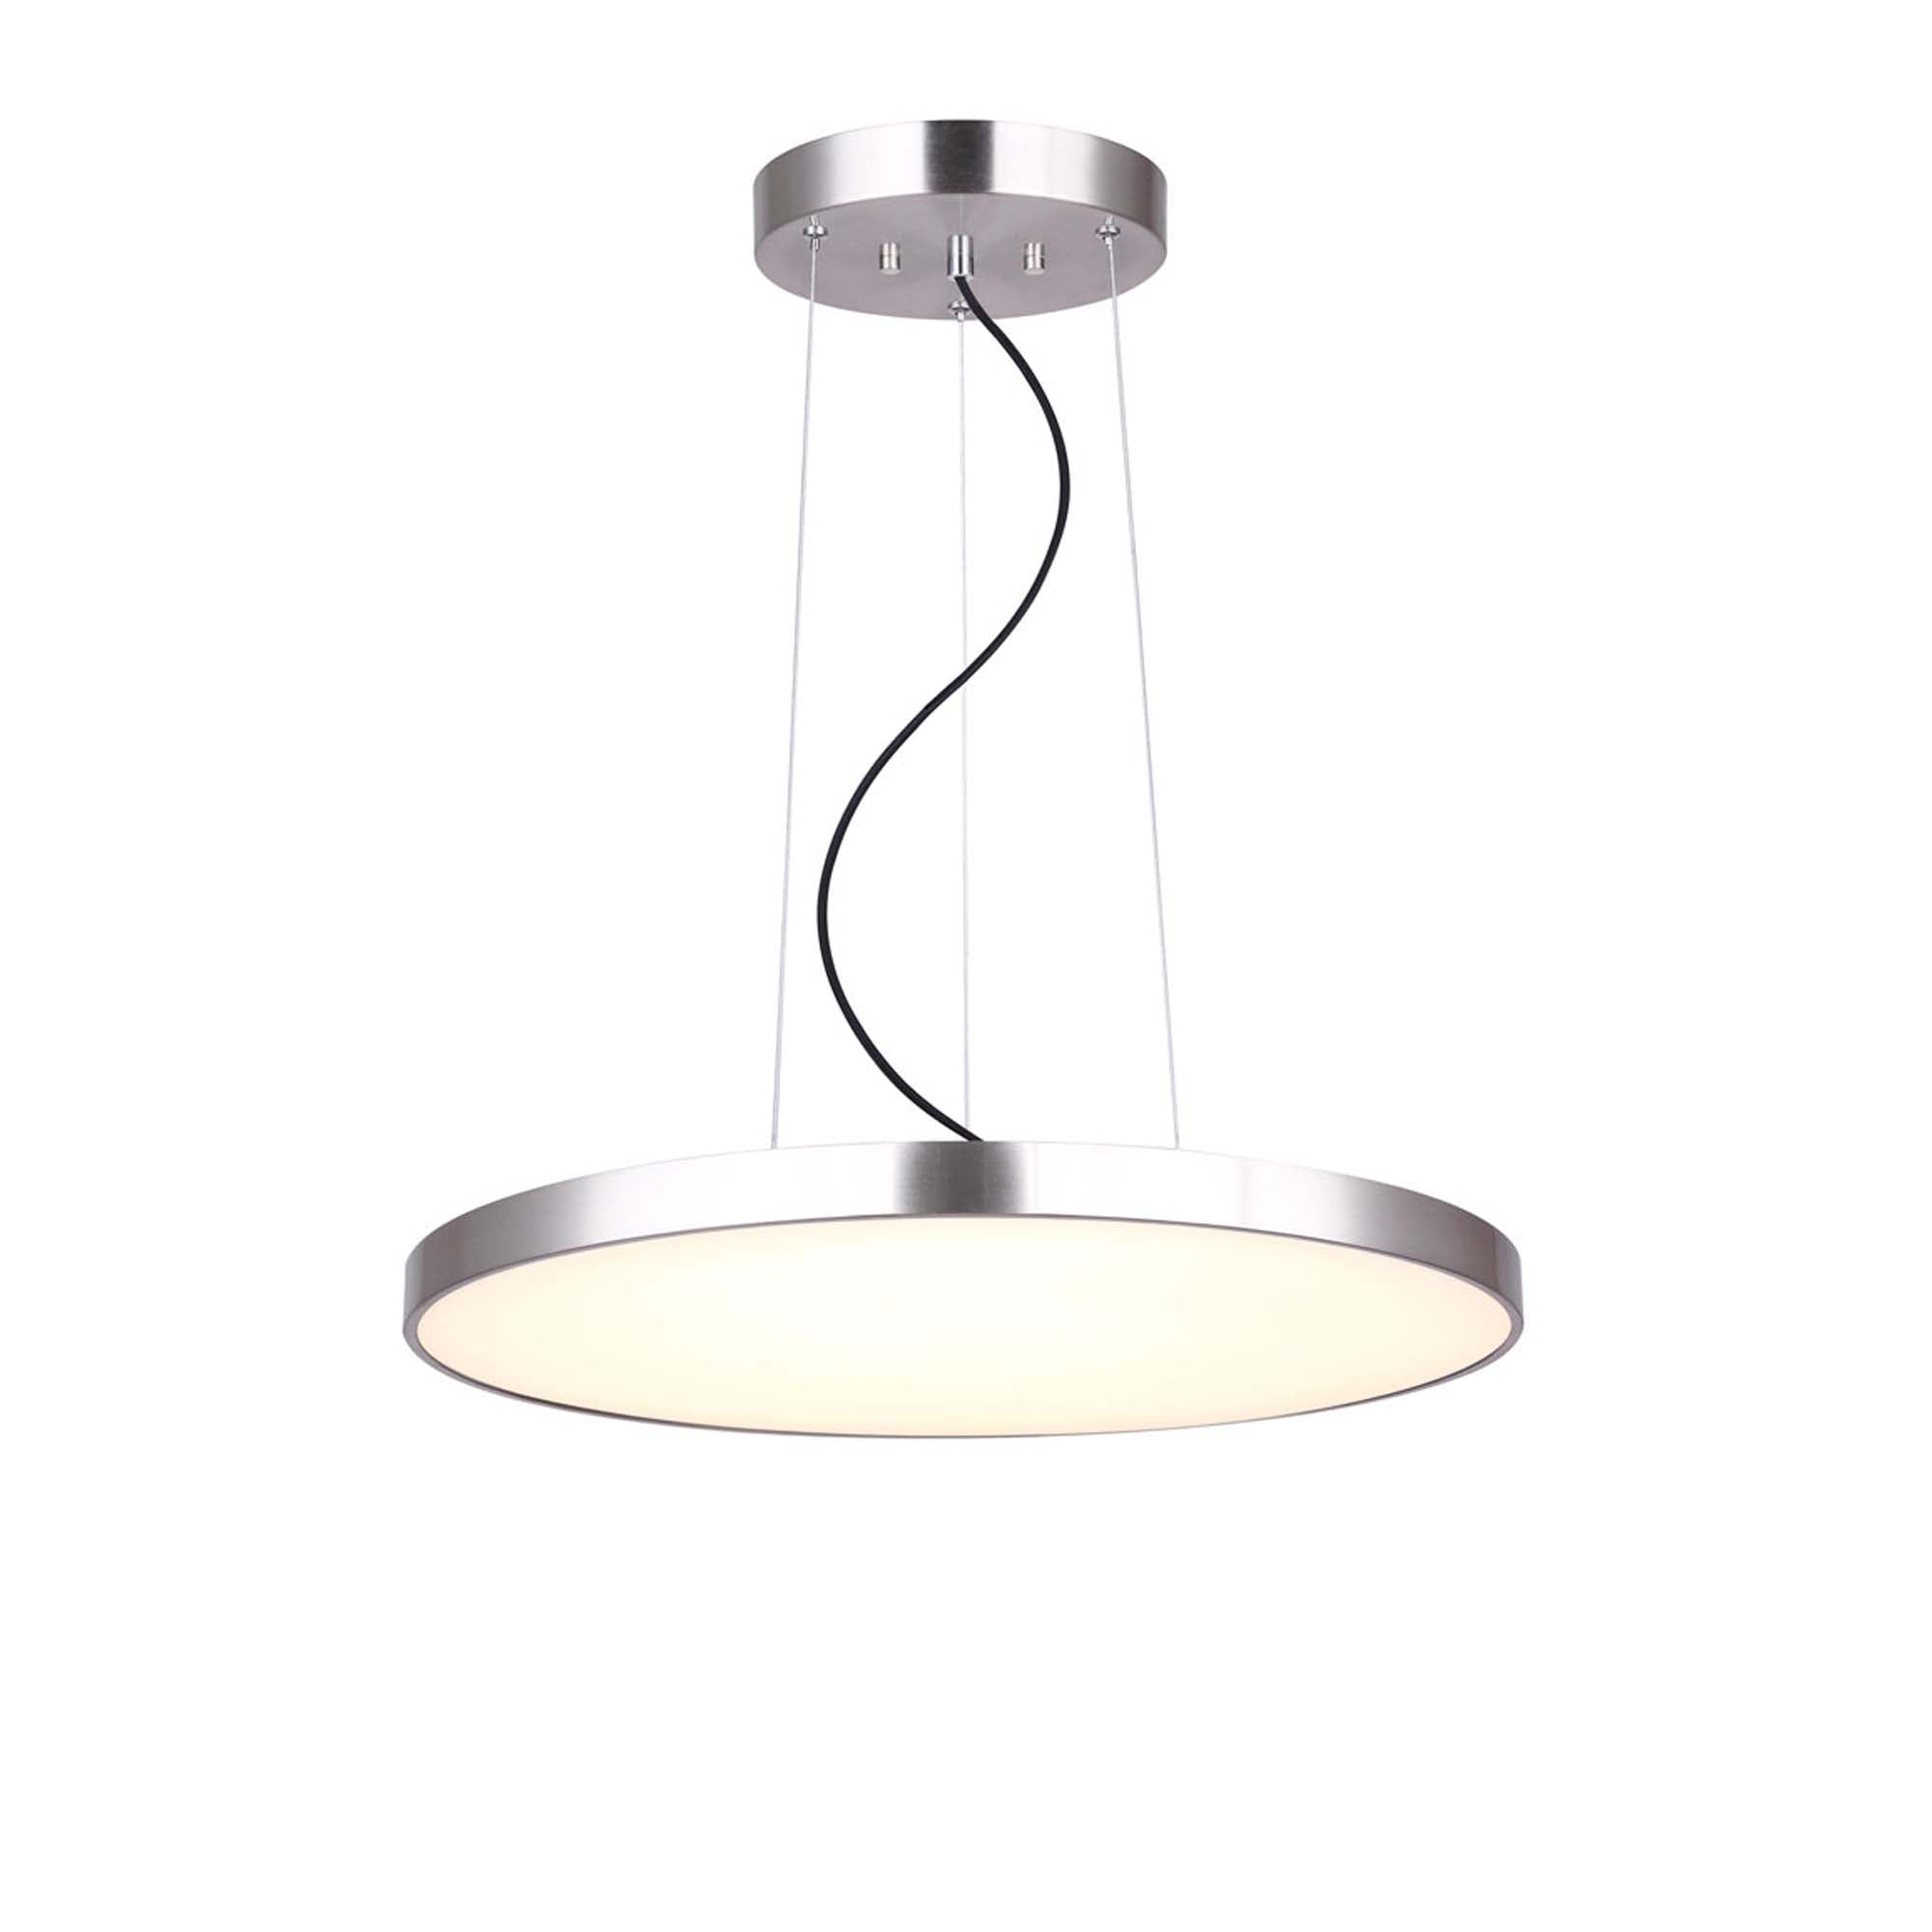 LENOX Chandelier Nickel INTEGRATED LED - LCH230A24BN | CANARM